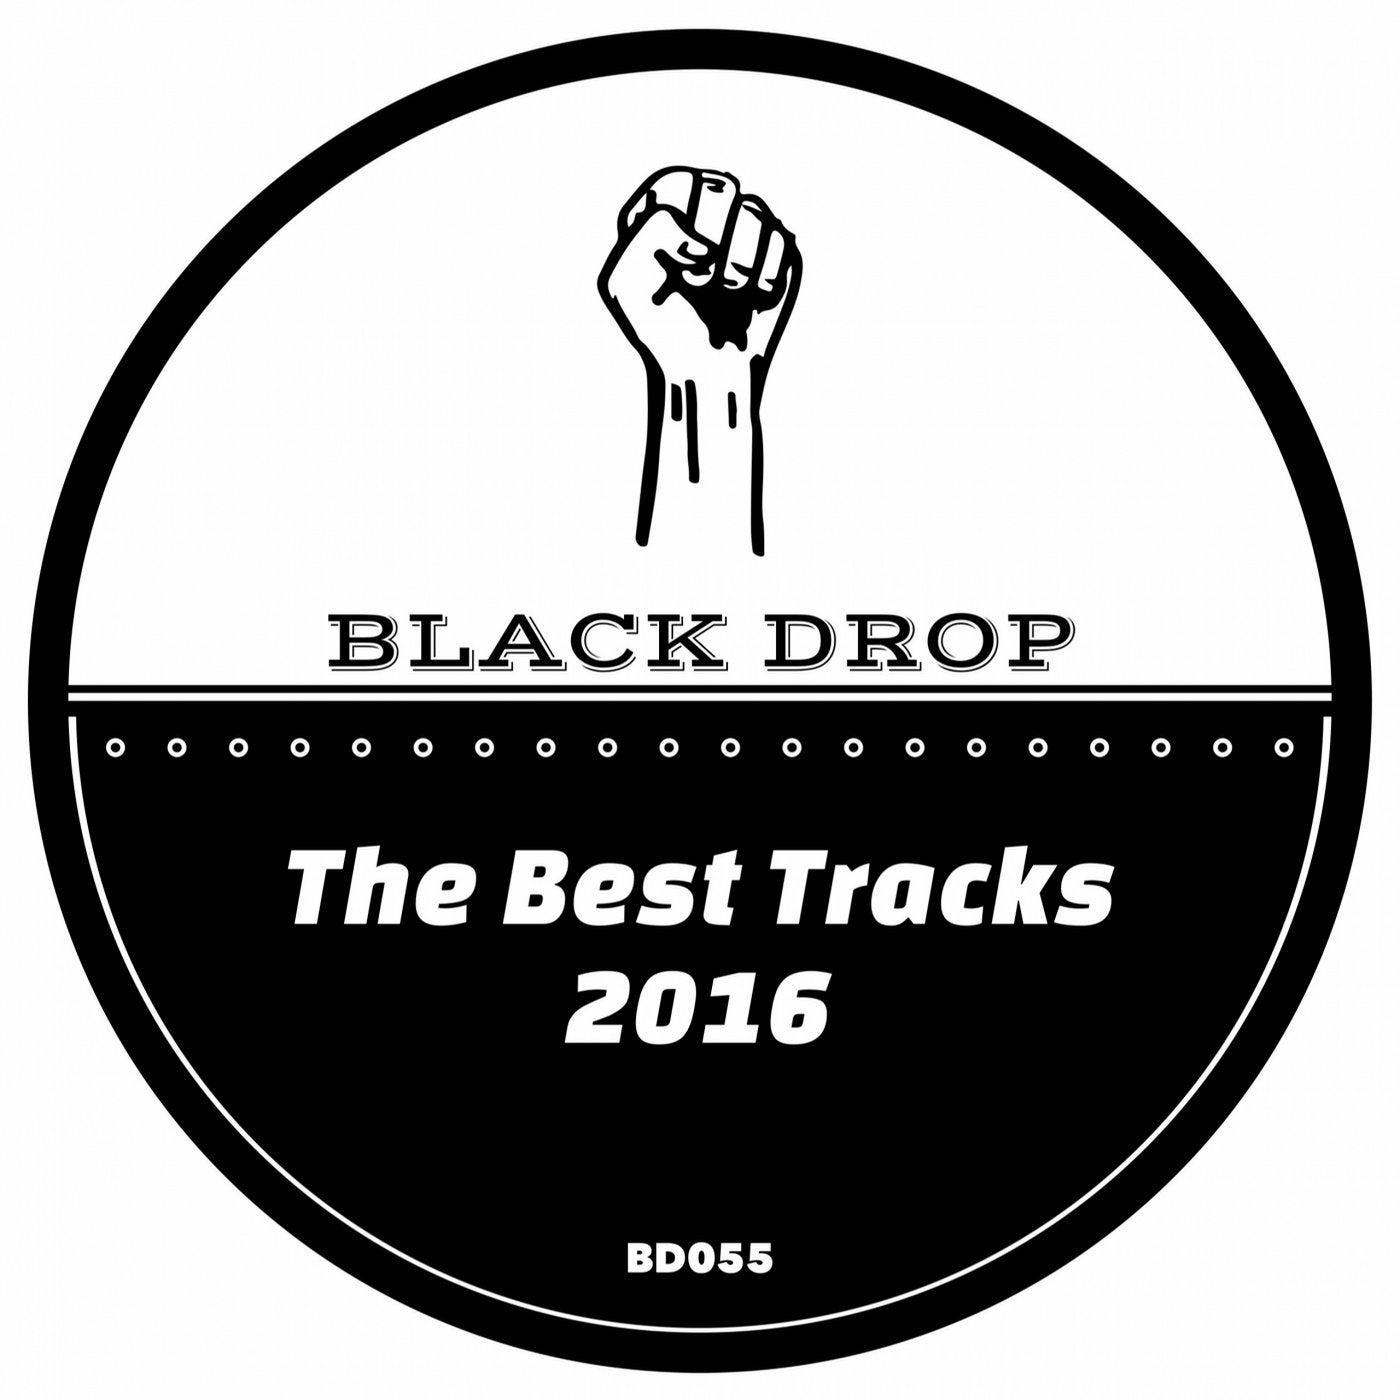 The Best Tracks of 2016